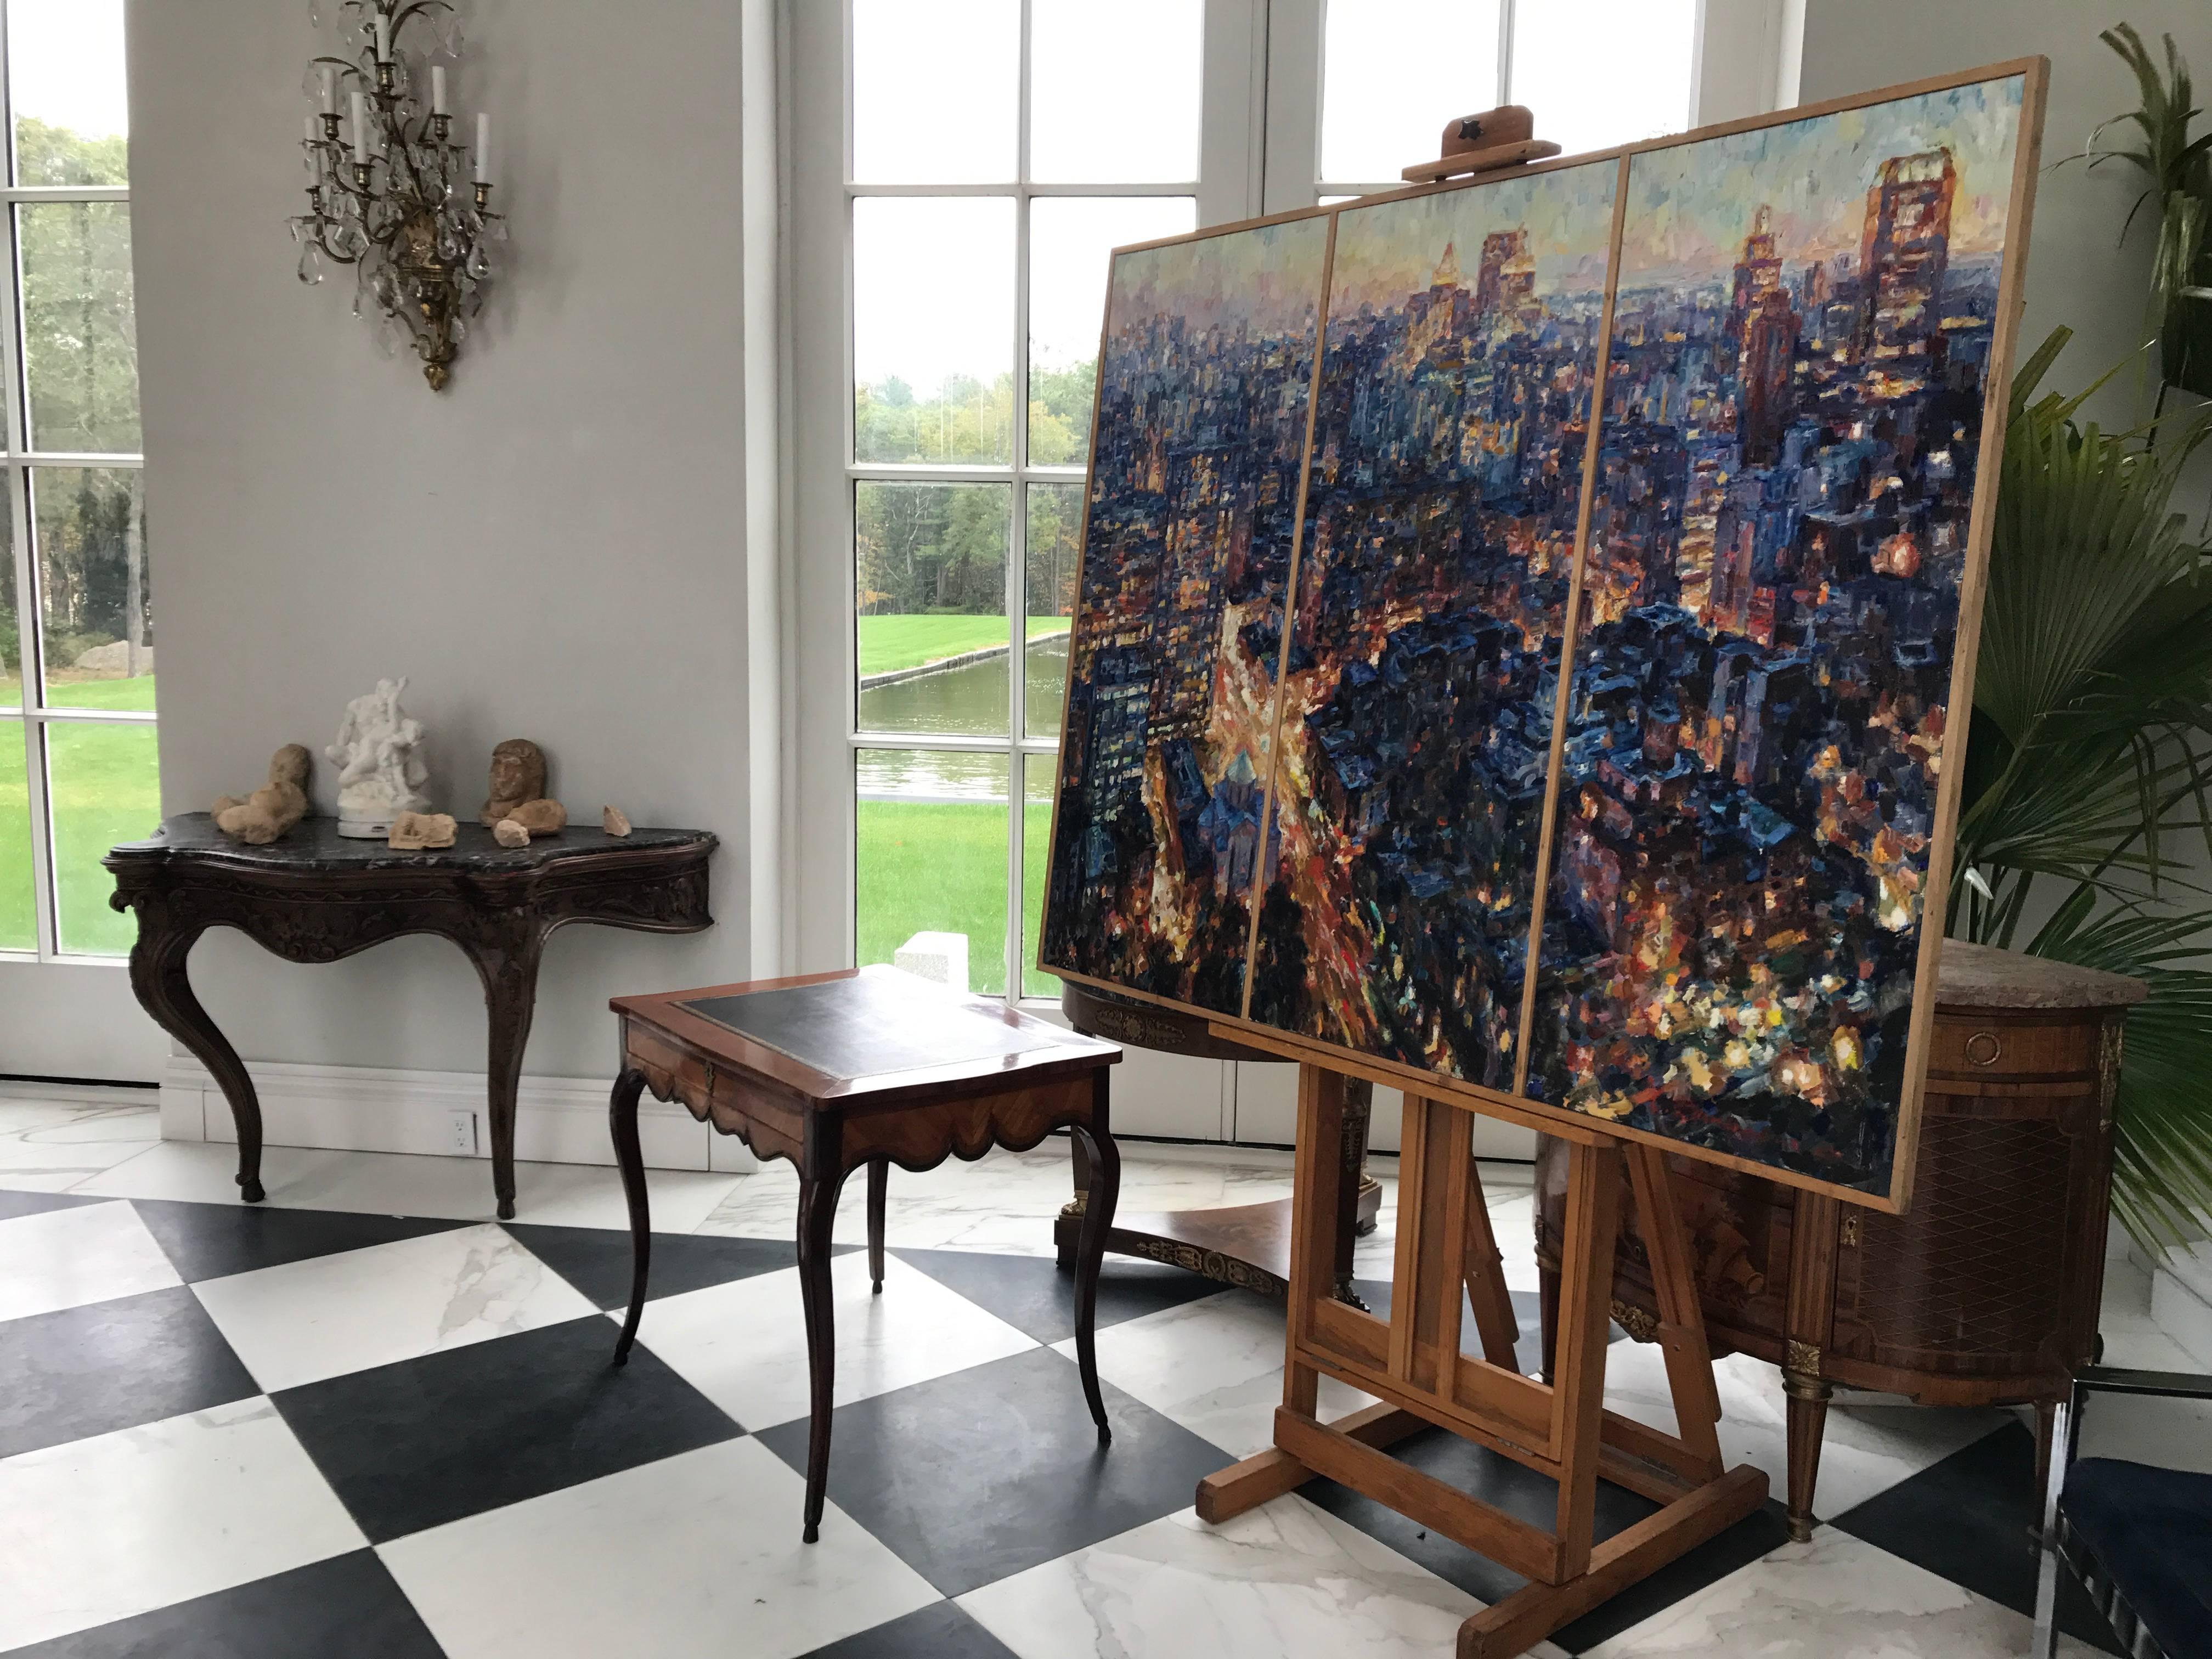 This stunning abstract oil on canvas is a view of 3rd Avenue in New York City. It was painted by world famous artist Sergei Danilin from Saint Petersburg, Russia in 2005.
This three section canvas can command a room and can be displayed in three